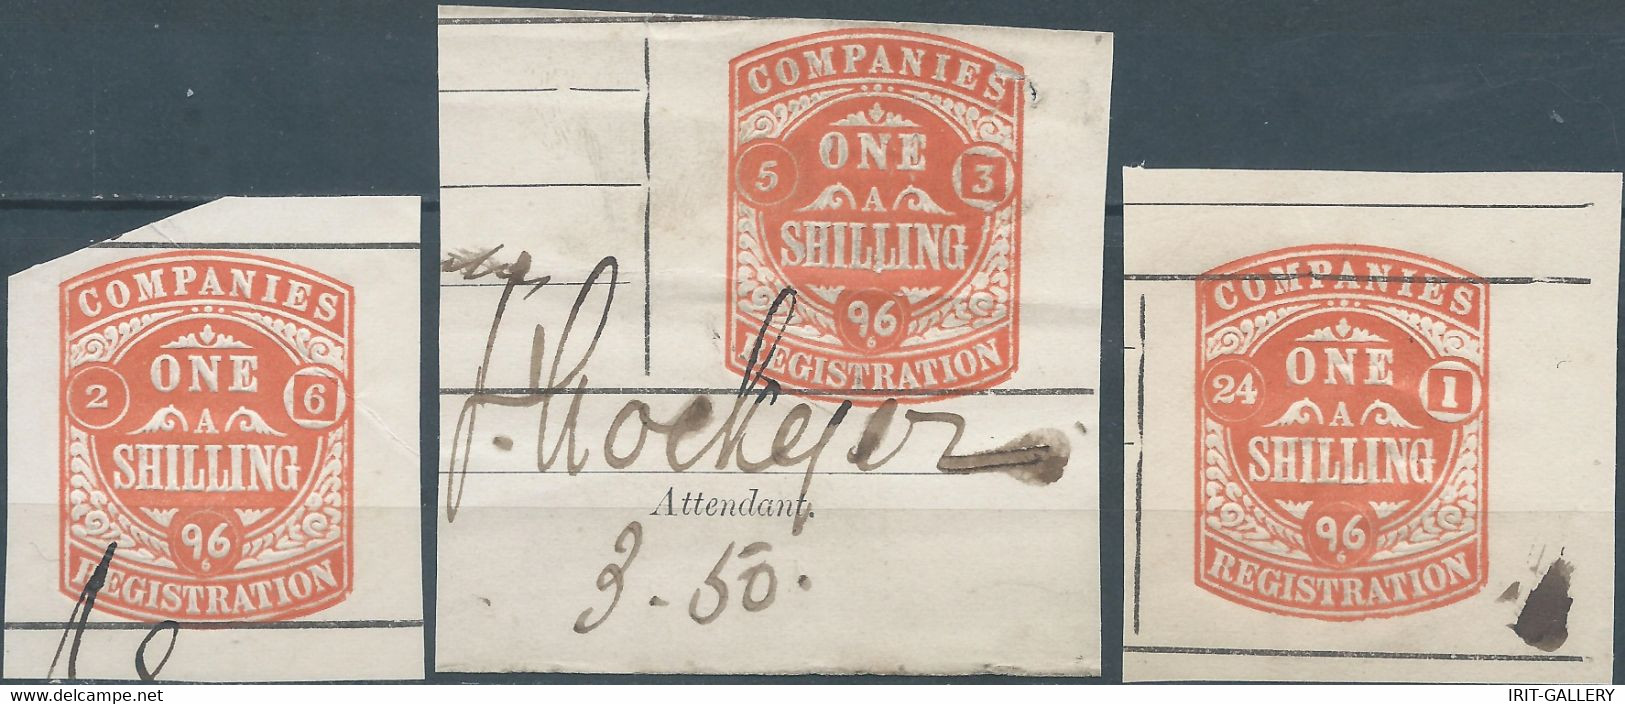 Great Britain-ENGLAND,1896 Tax Fee,COMPANIES REGISTRATION 1 SHILLING - Revenue Stamps